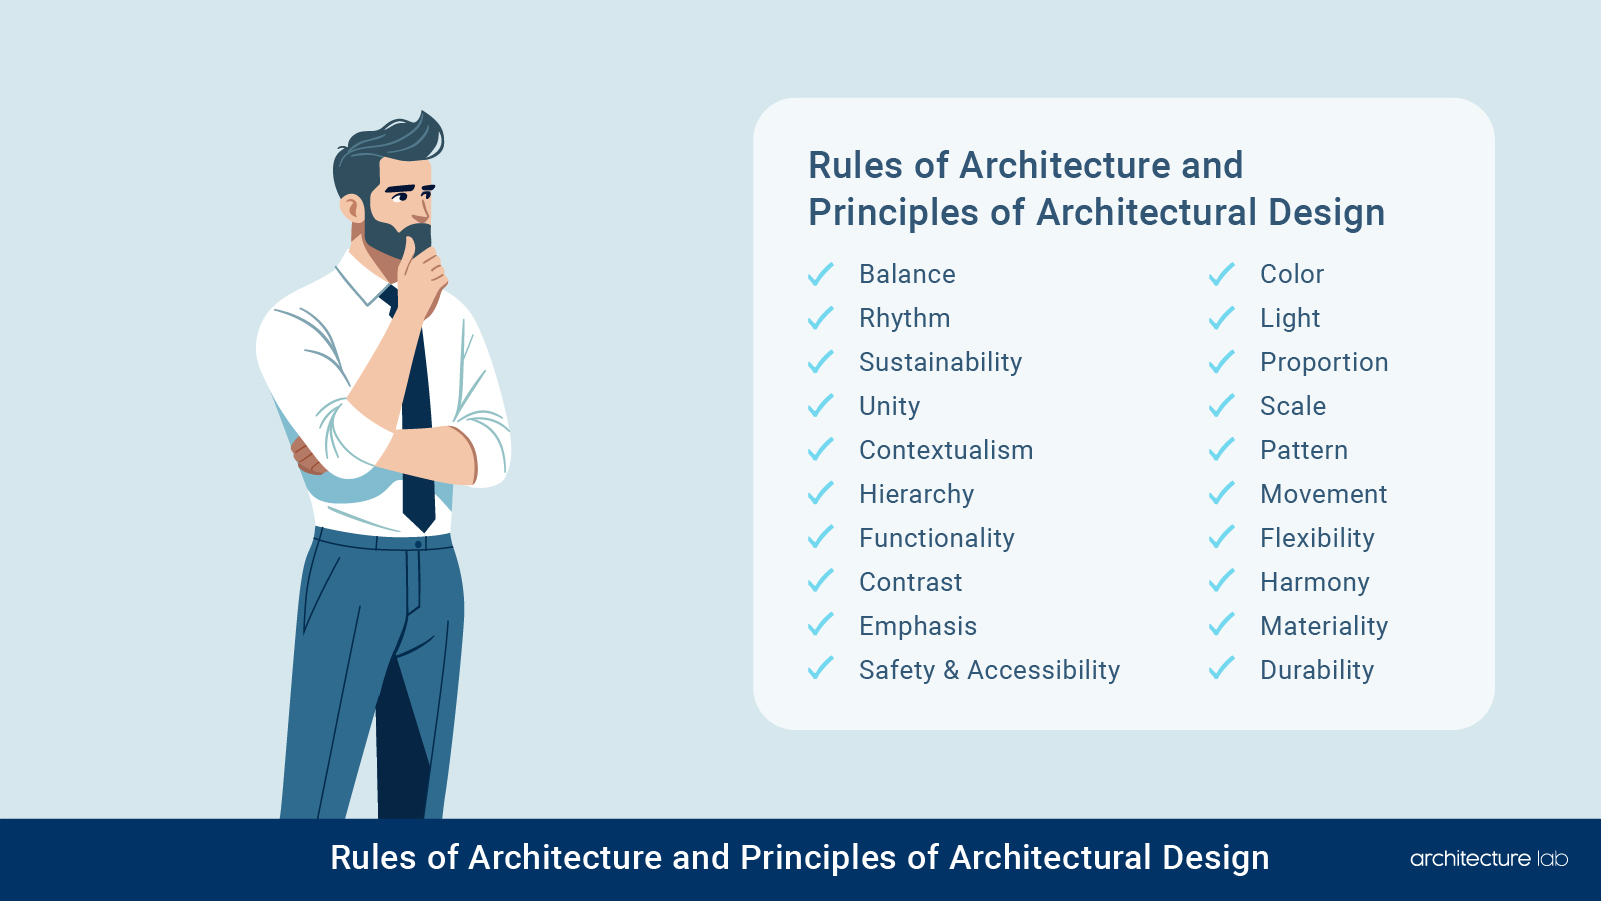 Rules of architecture: the important principles of architectural design